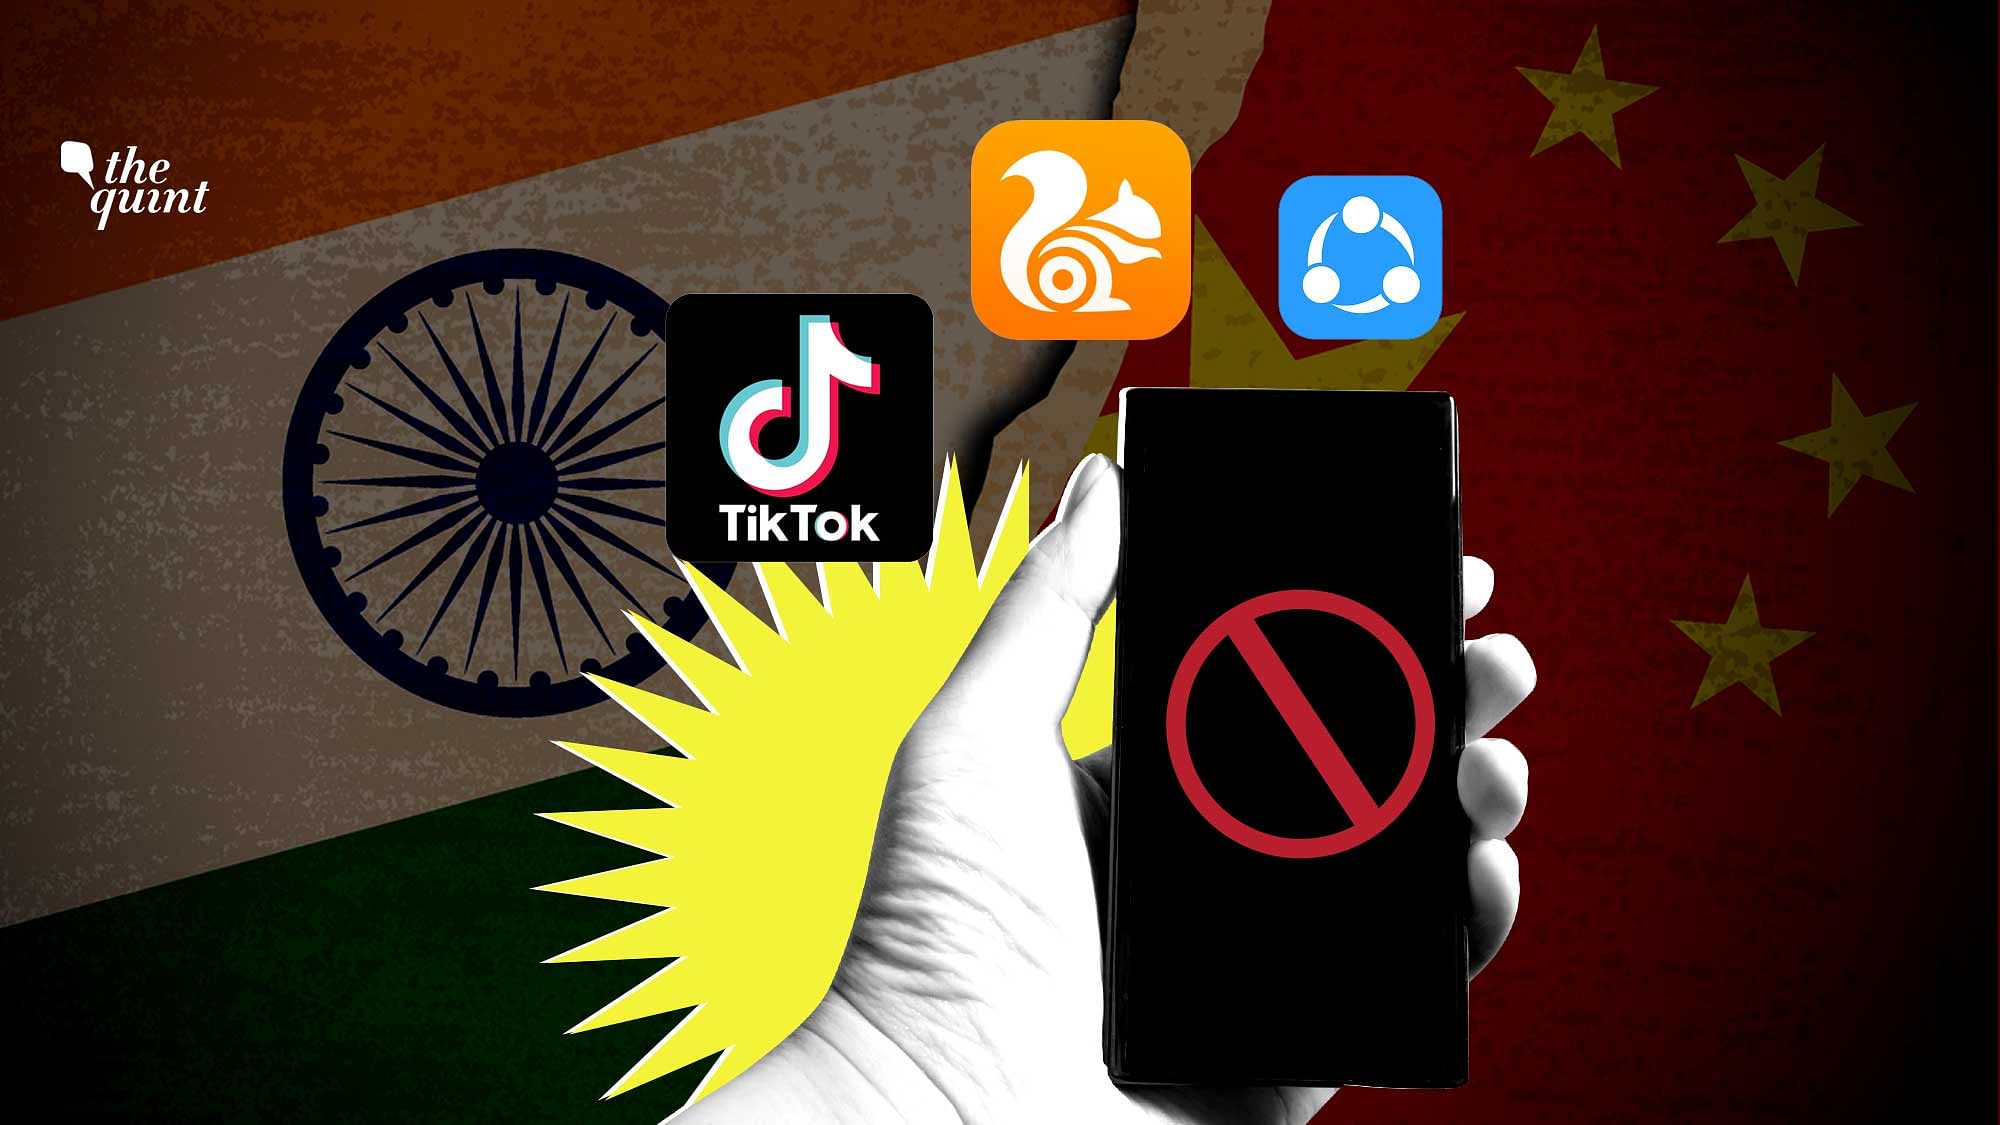 59 Chinese Apps Banned: Amid India-China face-off, Centre blocks 59 Chinese apps. 